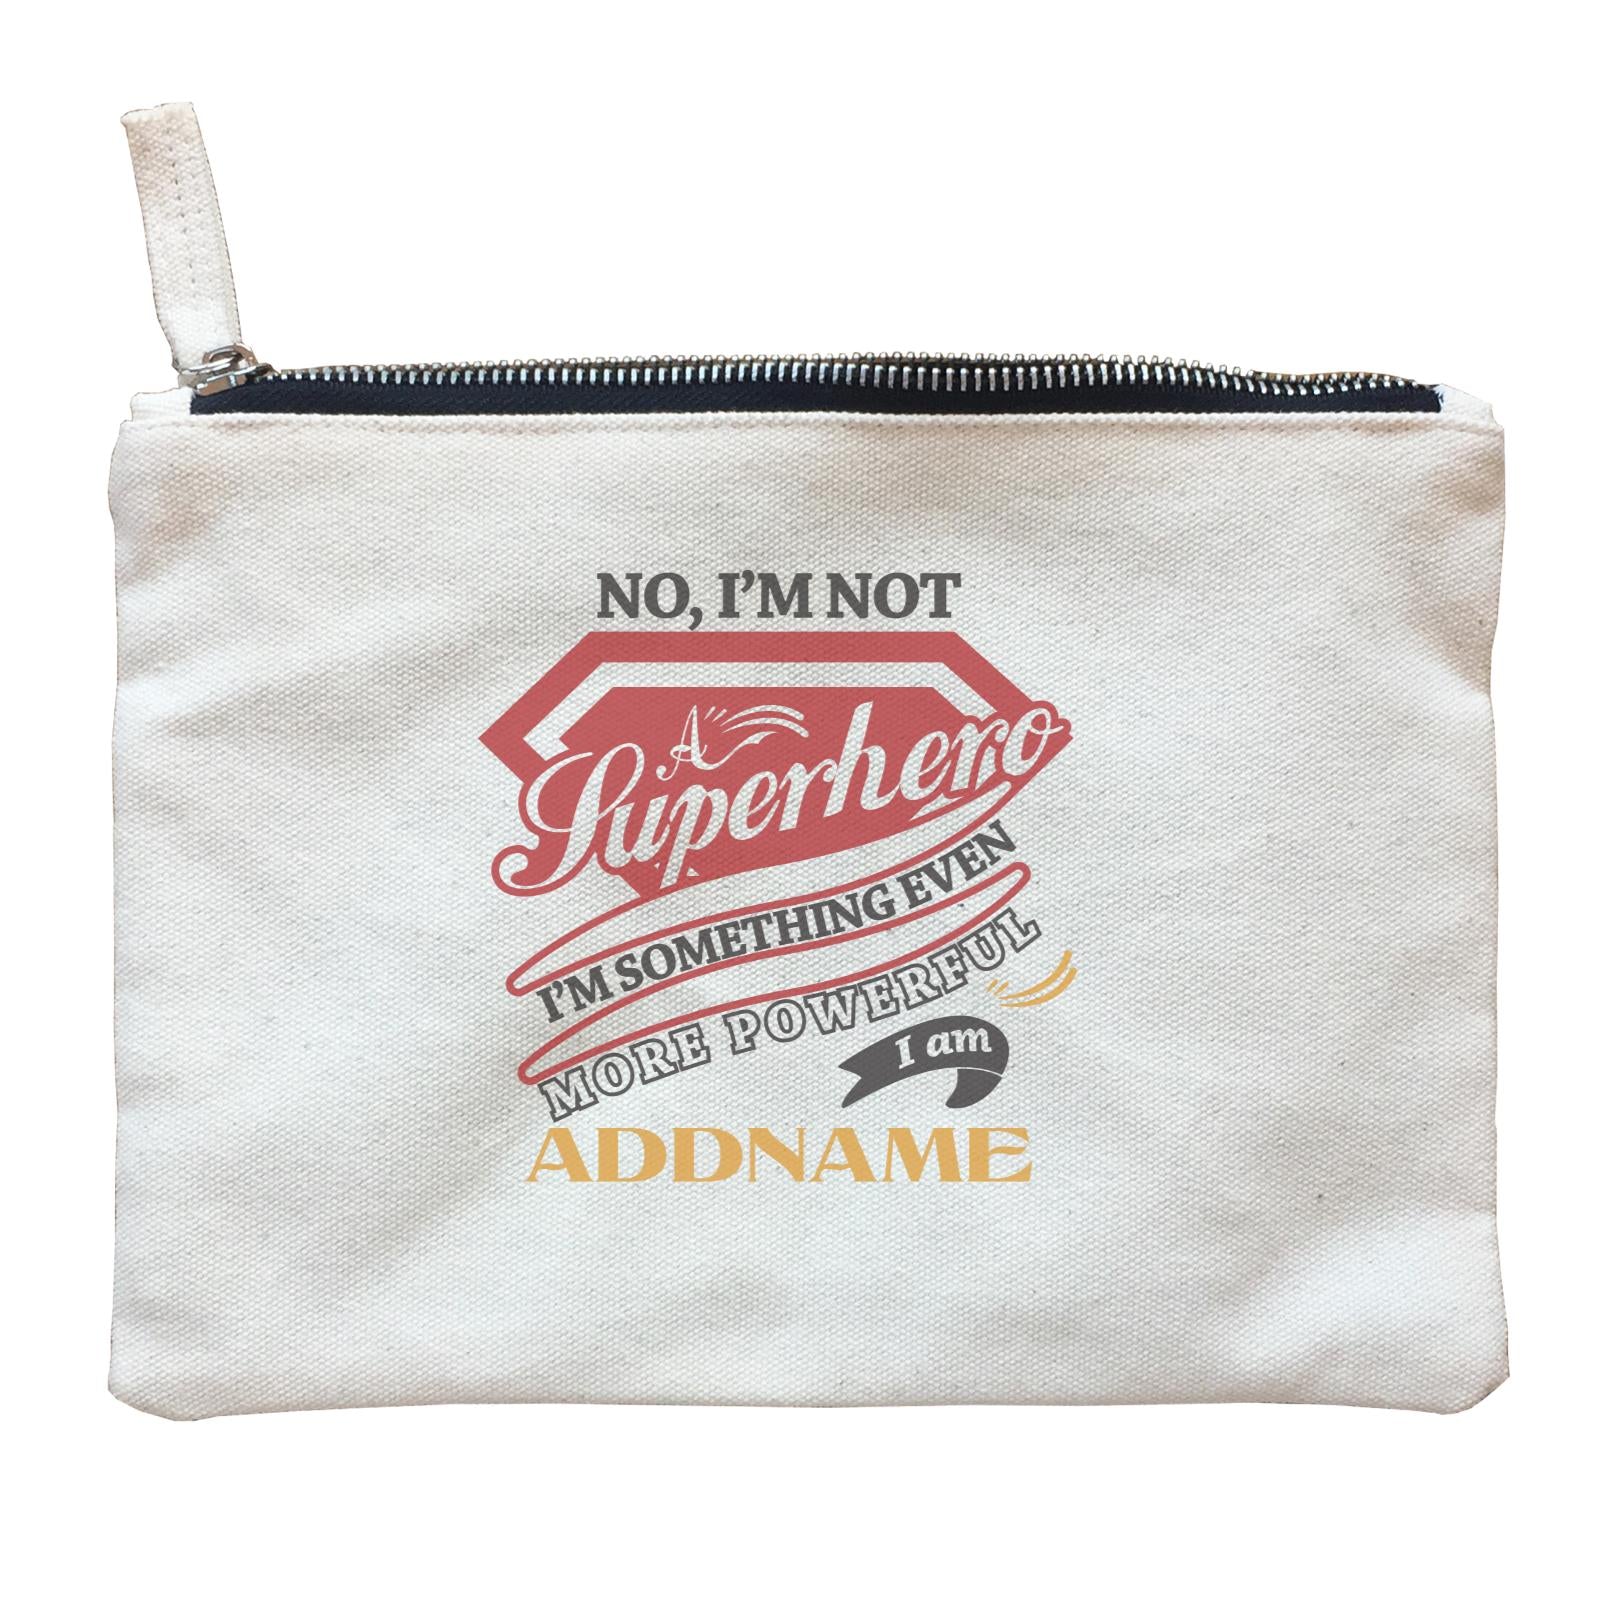 Personalize It Awesome No I'm Not Superhero I'm Something Even More Powerful with Addname Zipper Pouch